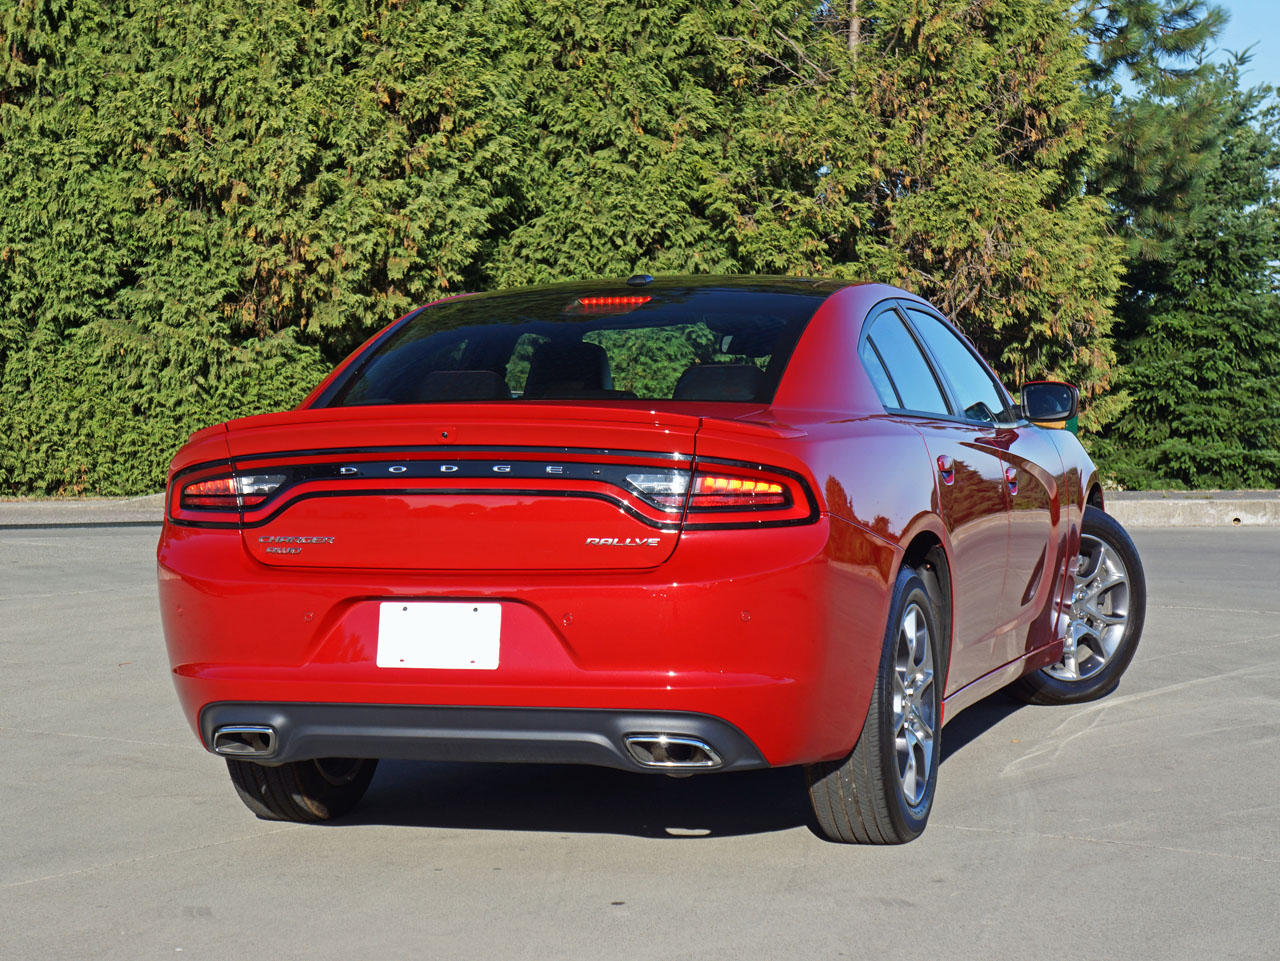 2015 Dodge Charger SXT Plus Rallye AWD Road Test Review.